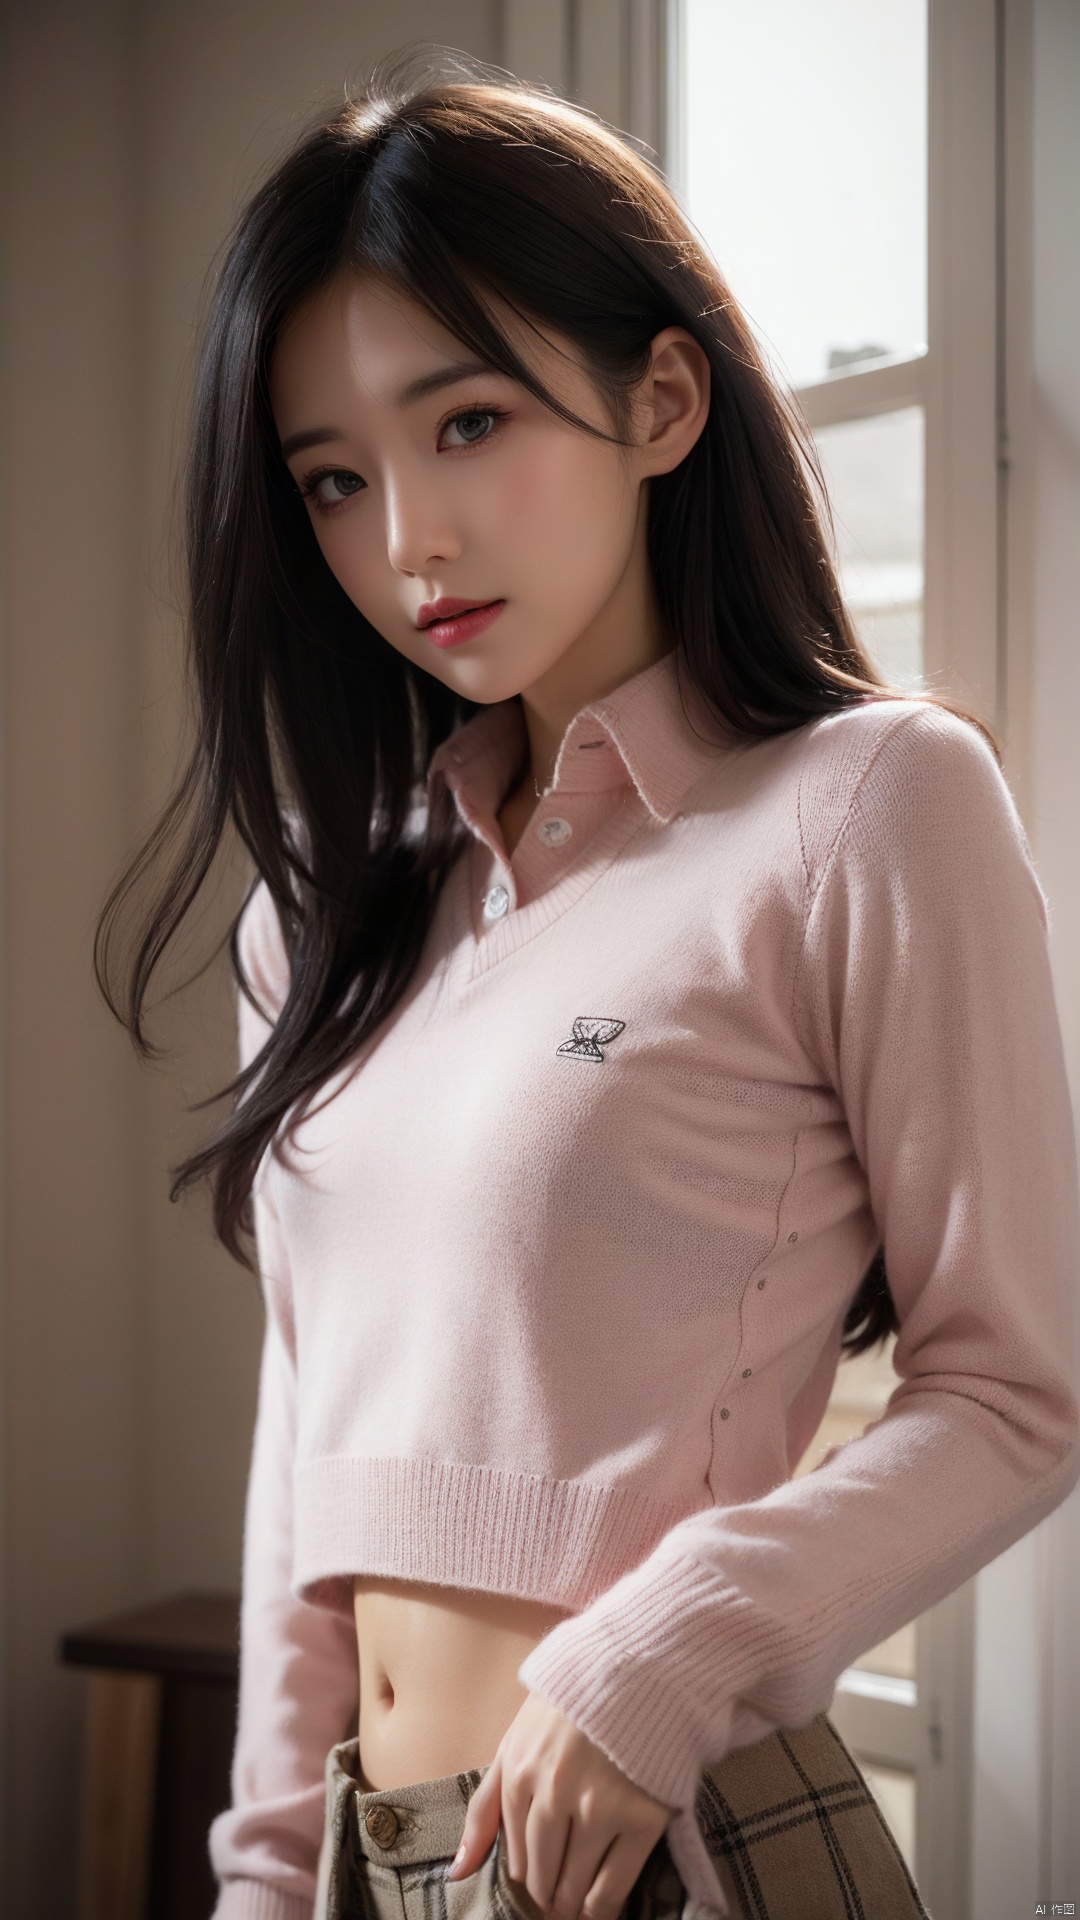  1girl,moyou,solo,upper body,white background,black hair,face front,upper body,studio light,studio,side light,makeup portrait,pink eye shadow,(Perfect female body:1.2),(small breasts:1.2),(linea alba:1.2),preppy style,collared shirts,khaki pants,cable knit sweaters,loafers,blazers,plaid skirts,( chiaroscuro,Fujicolor, UHD, super detail ,raw,85mm,f/1.2,FujifilmXT4,),hair in front,her hair rested on her shoulders,sun behind,(from below:0.3),slim hip,float hair,floating hair,flying hair,hair blown by the wind,flat chest,gold sweater with pink stripes,